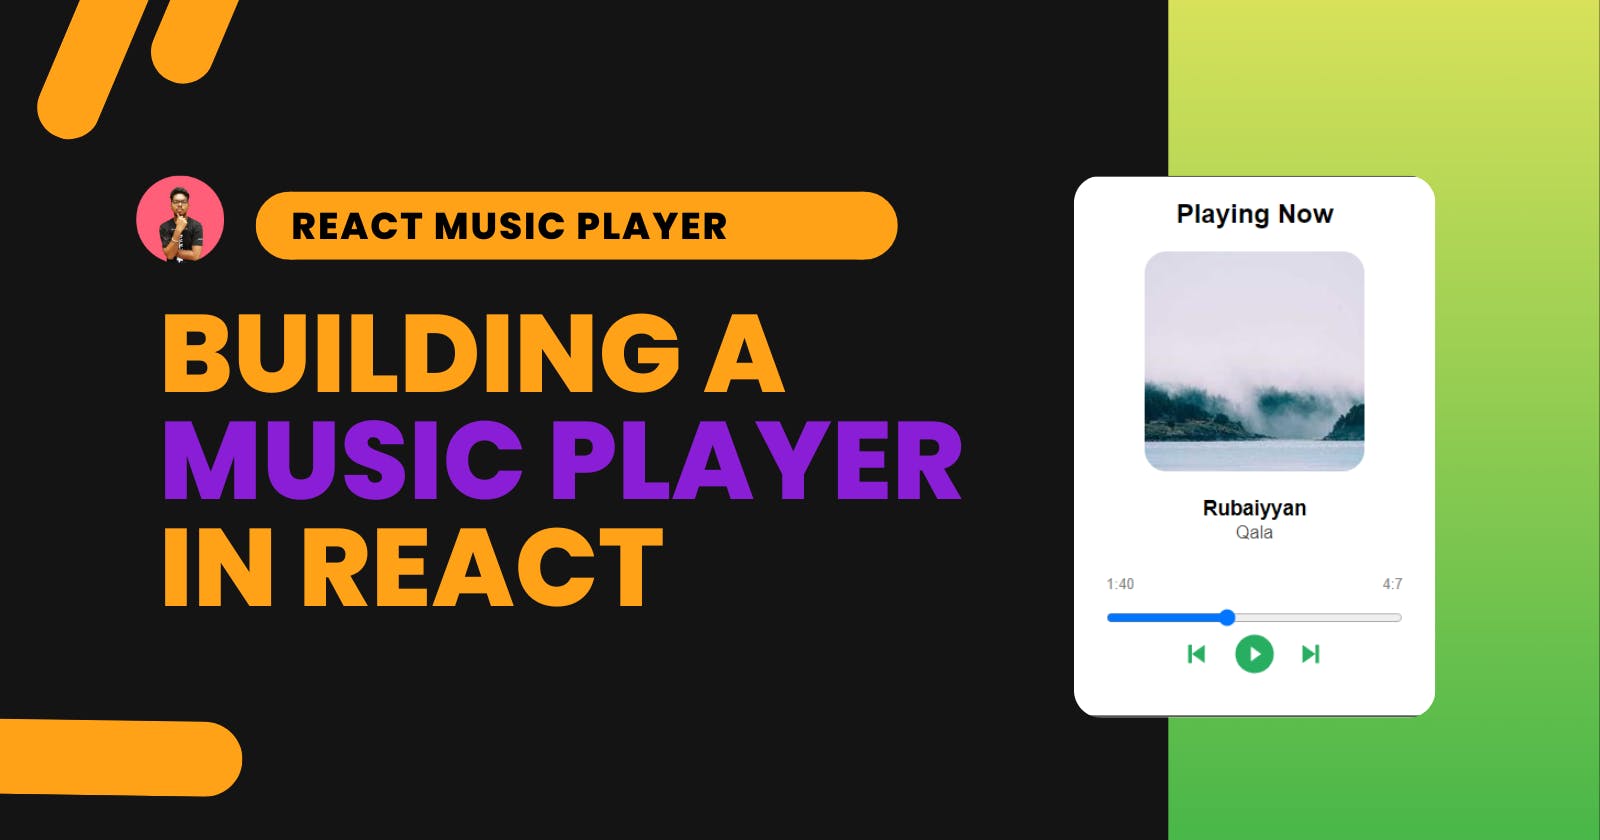 Building a Music Player in React